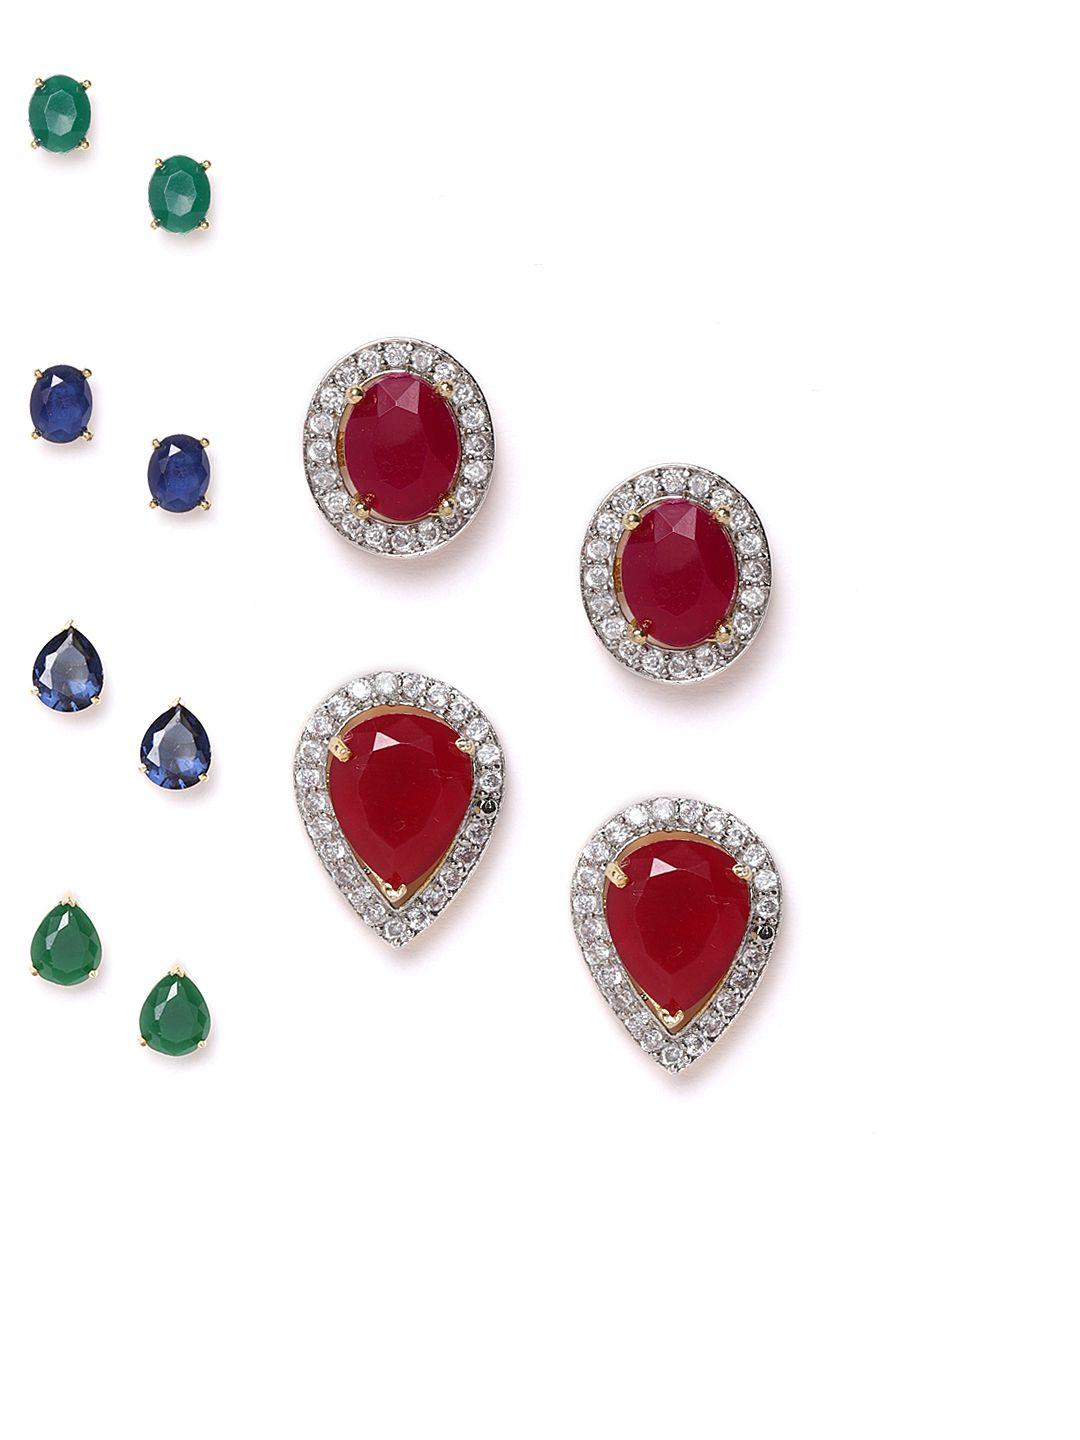 youbella set of 6 gold-plated stone-studded studs